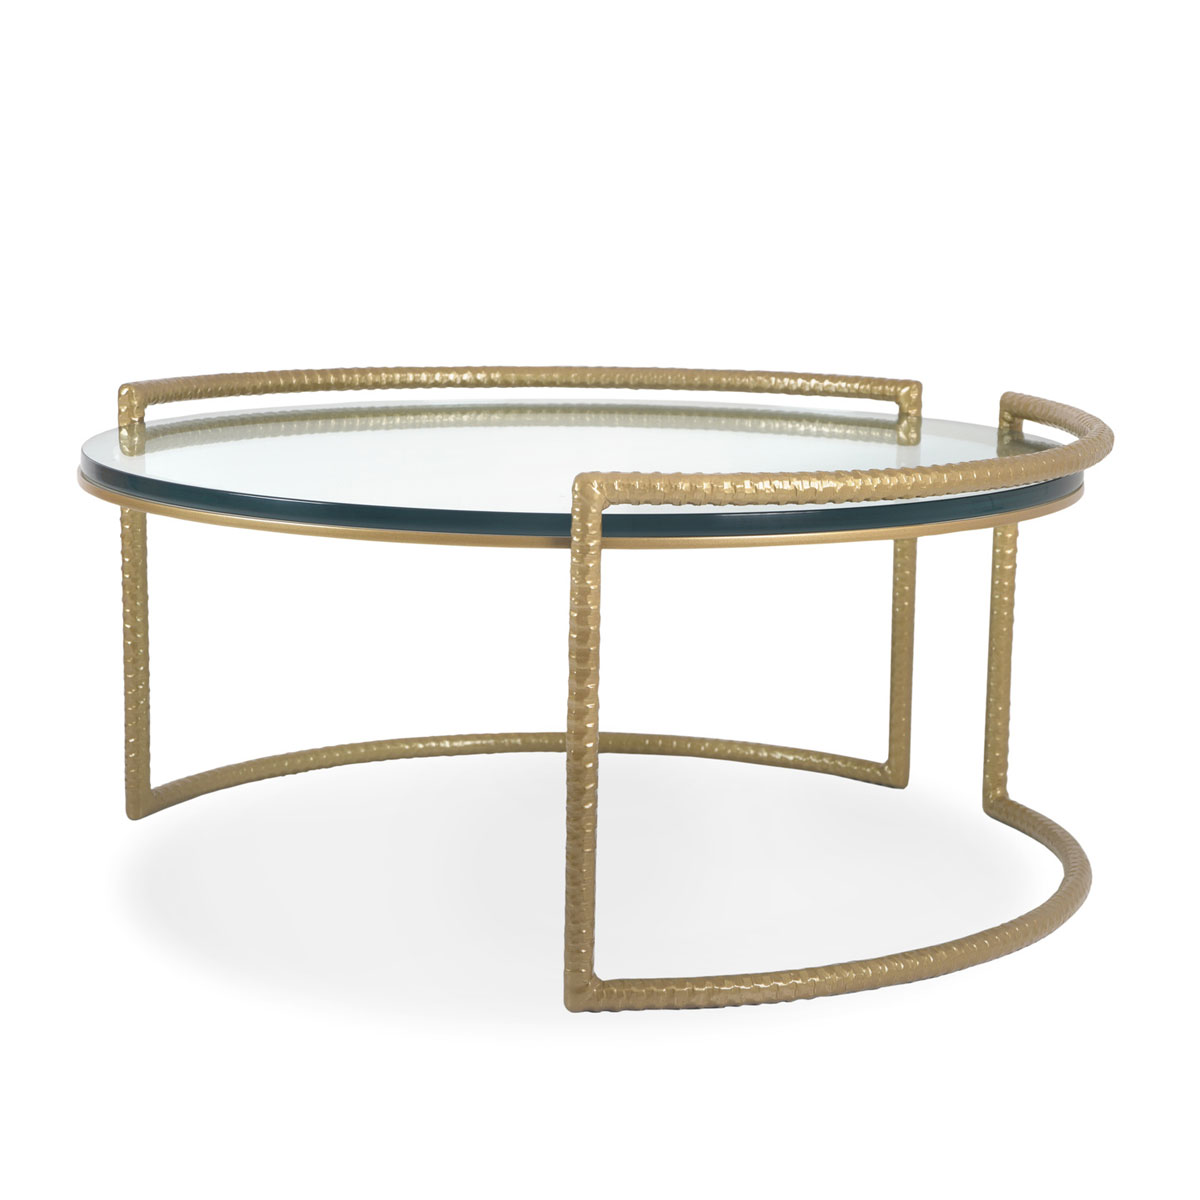 Charleston Forge Spa 42 inch Round Cocktail Table